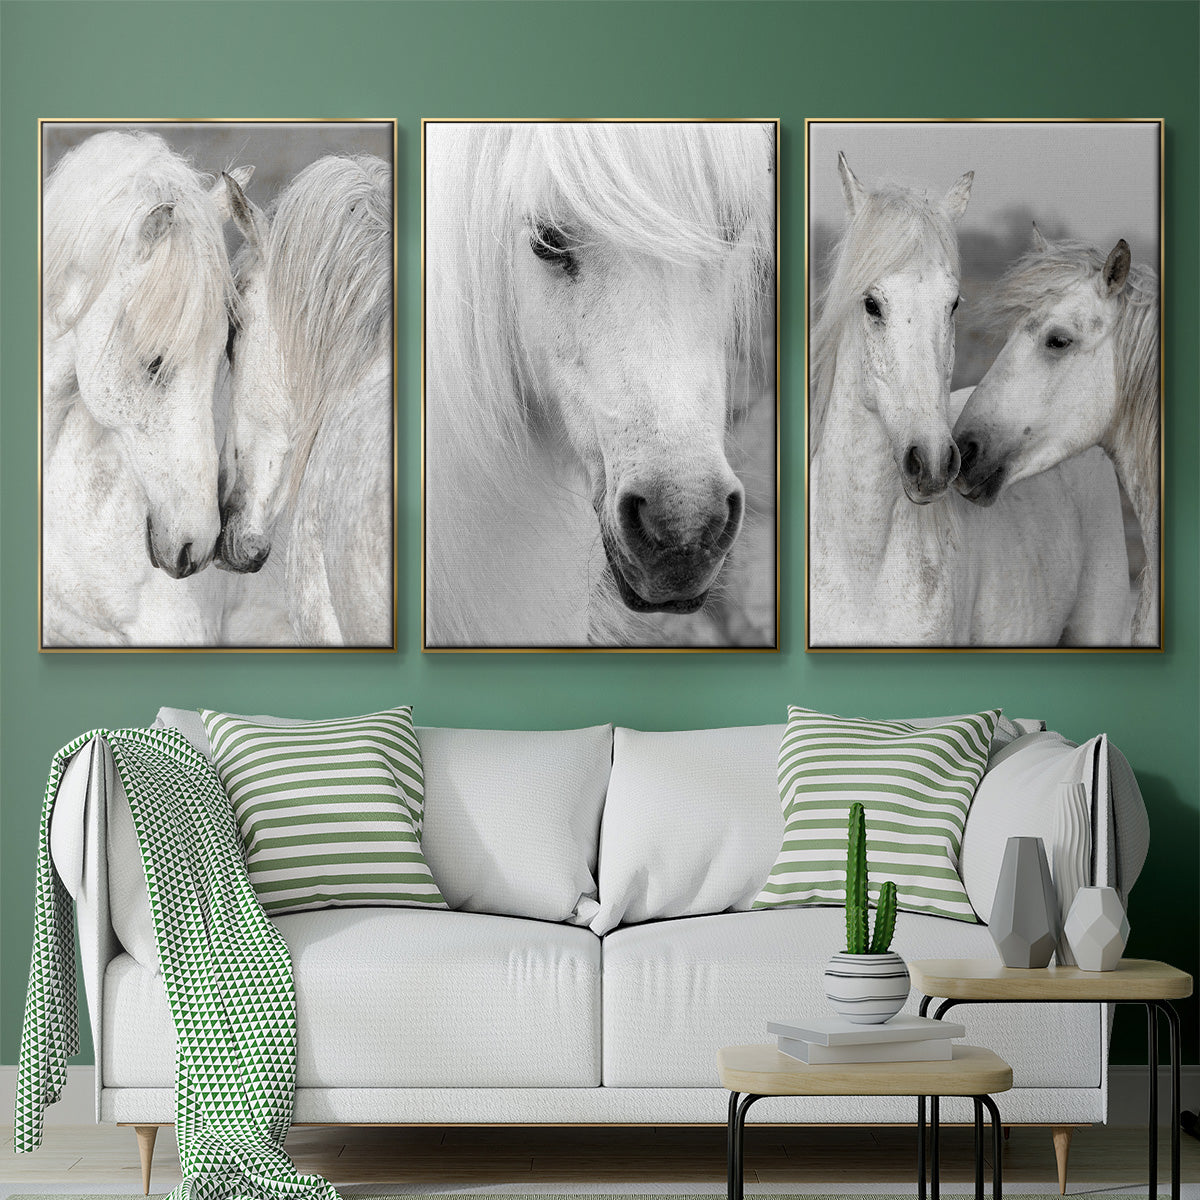 Affection I - Framed Premium Gallery Wrapped Canvas L Frame 3 Piece Set - Ready to Hang